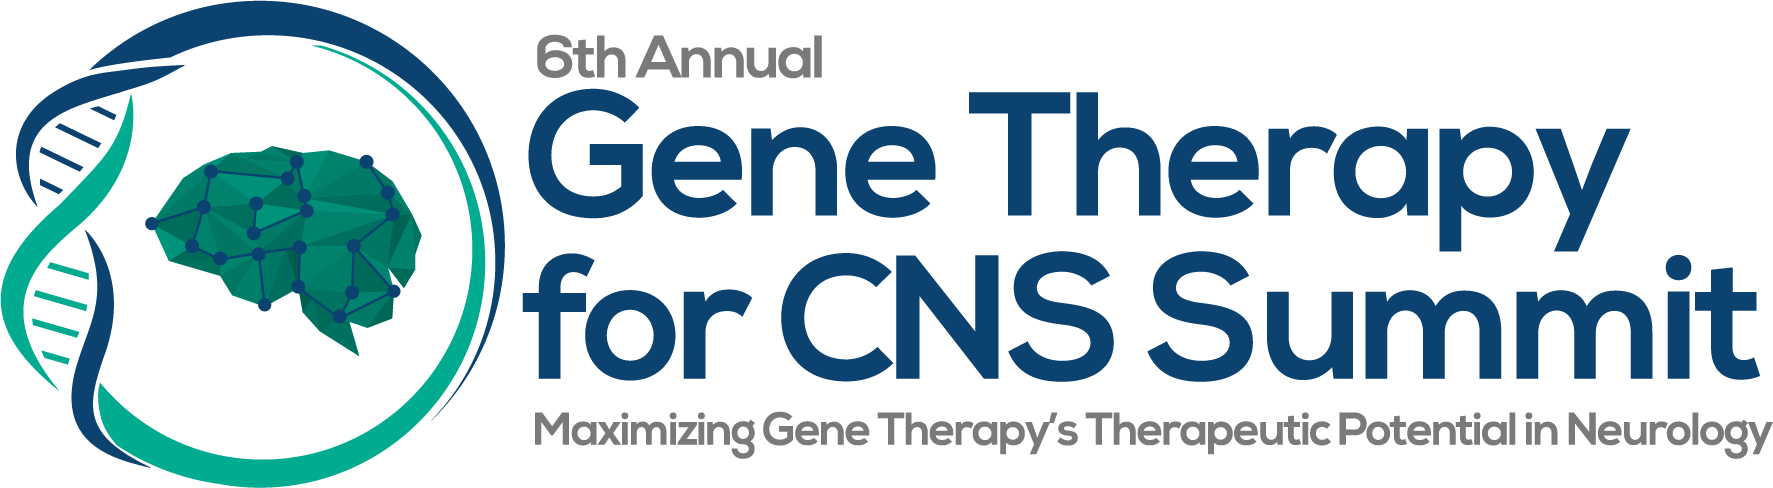 48817 – 6th Gene Therapy for CNS Summit (2)